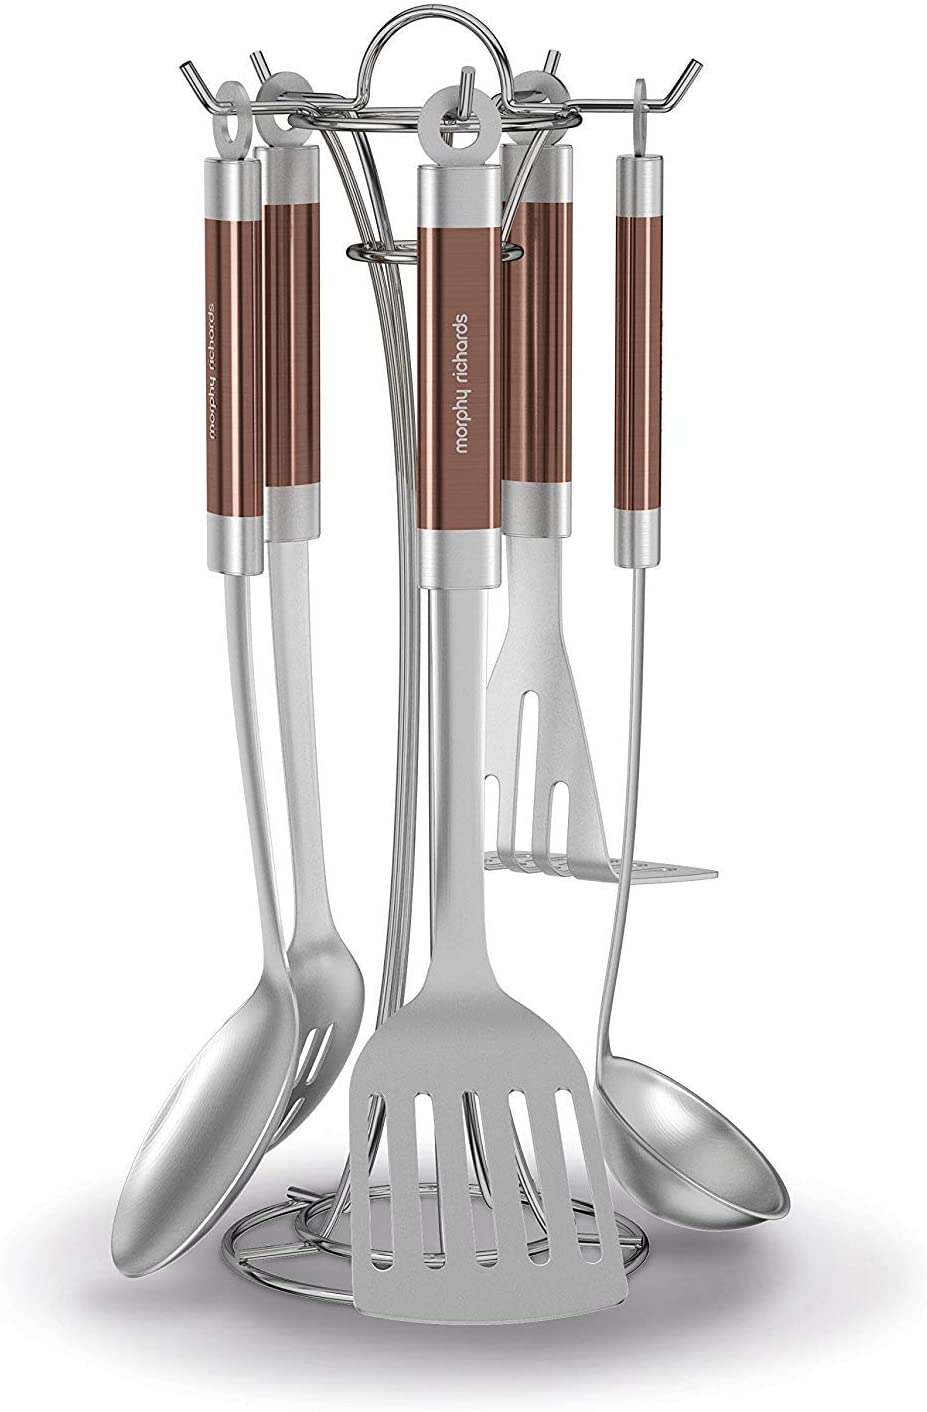 Morphy Richards 46825 Stainless Steel Accents 5 Piece Tool Set